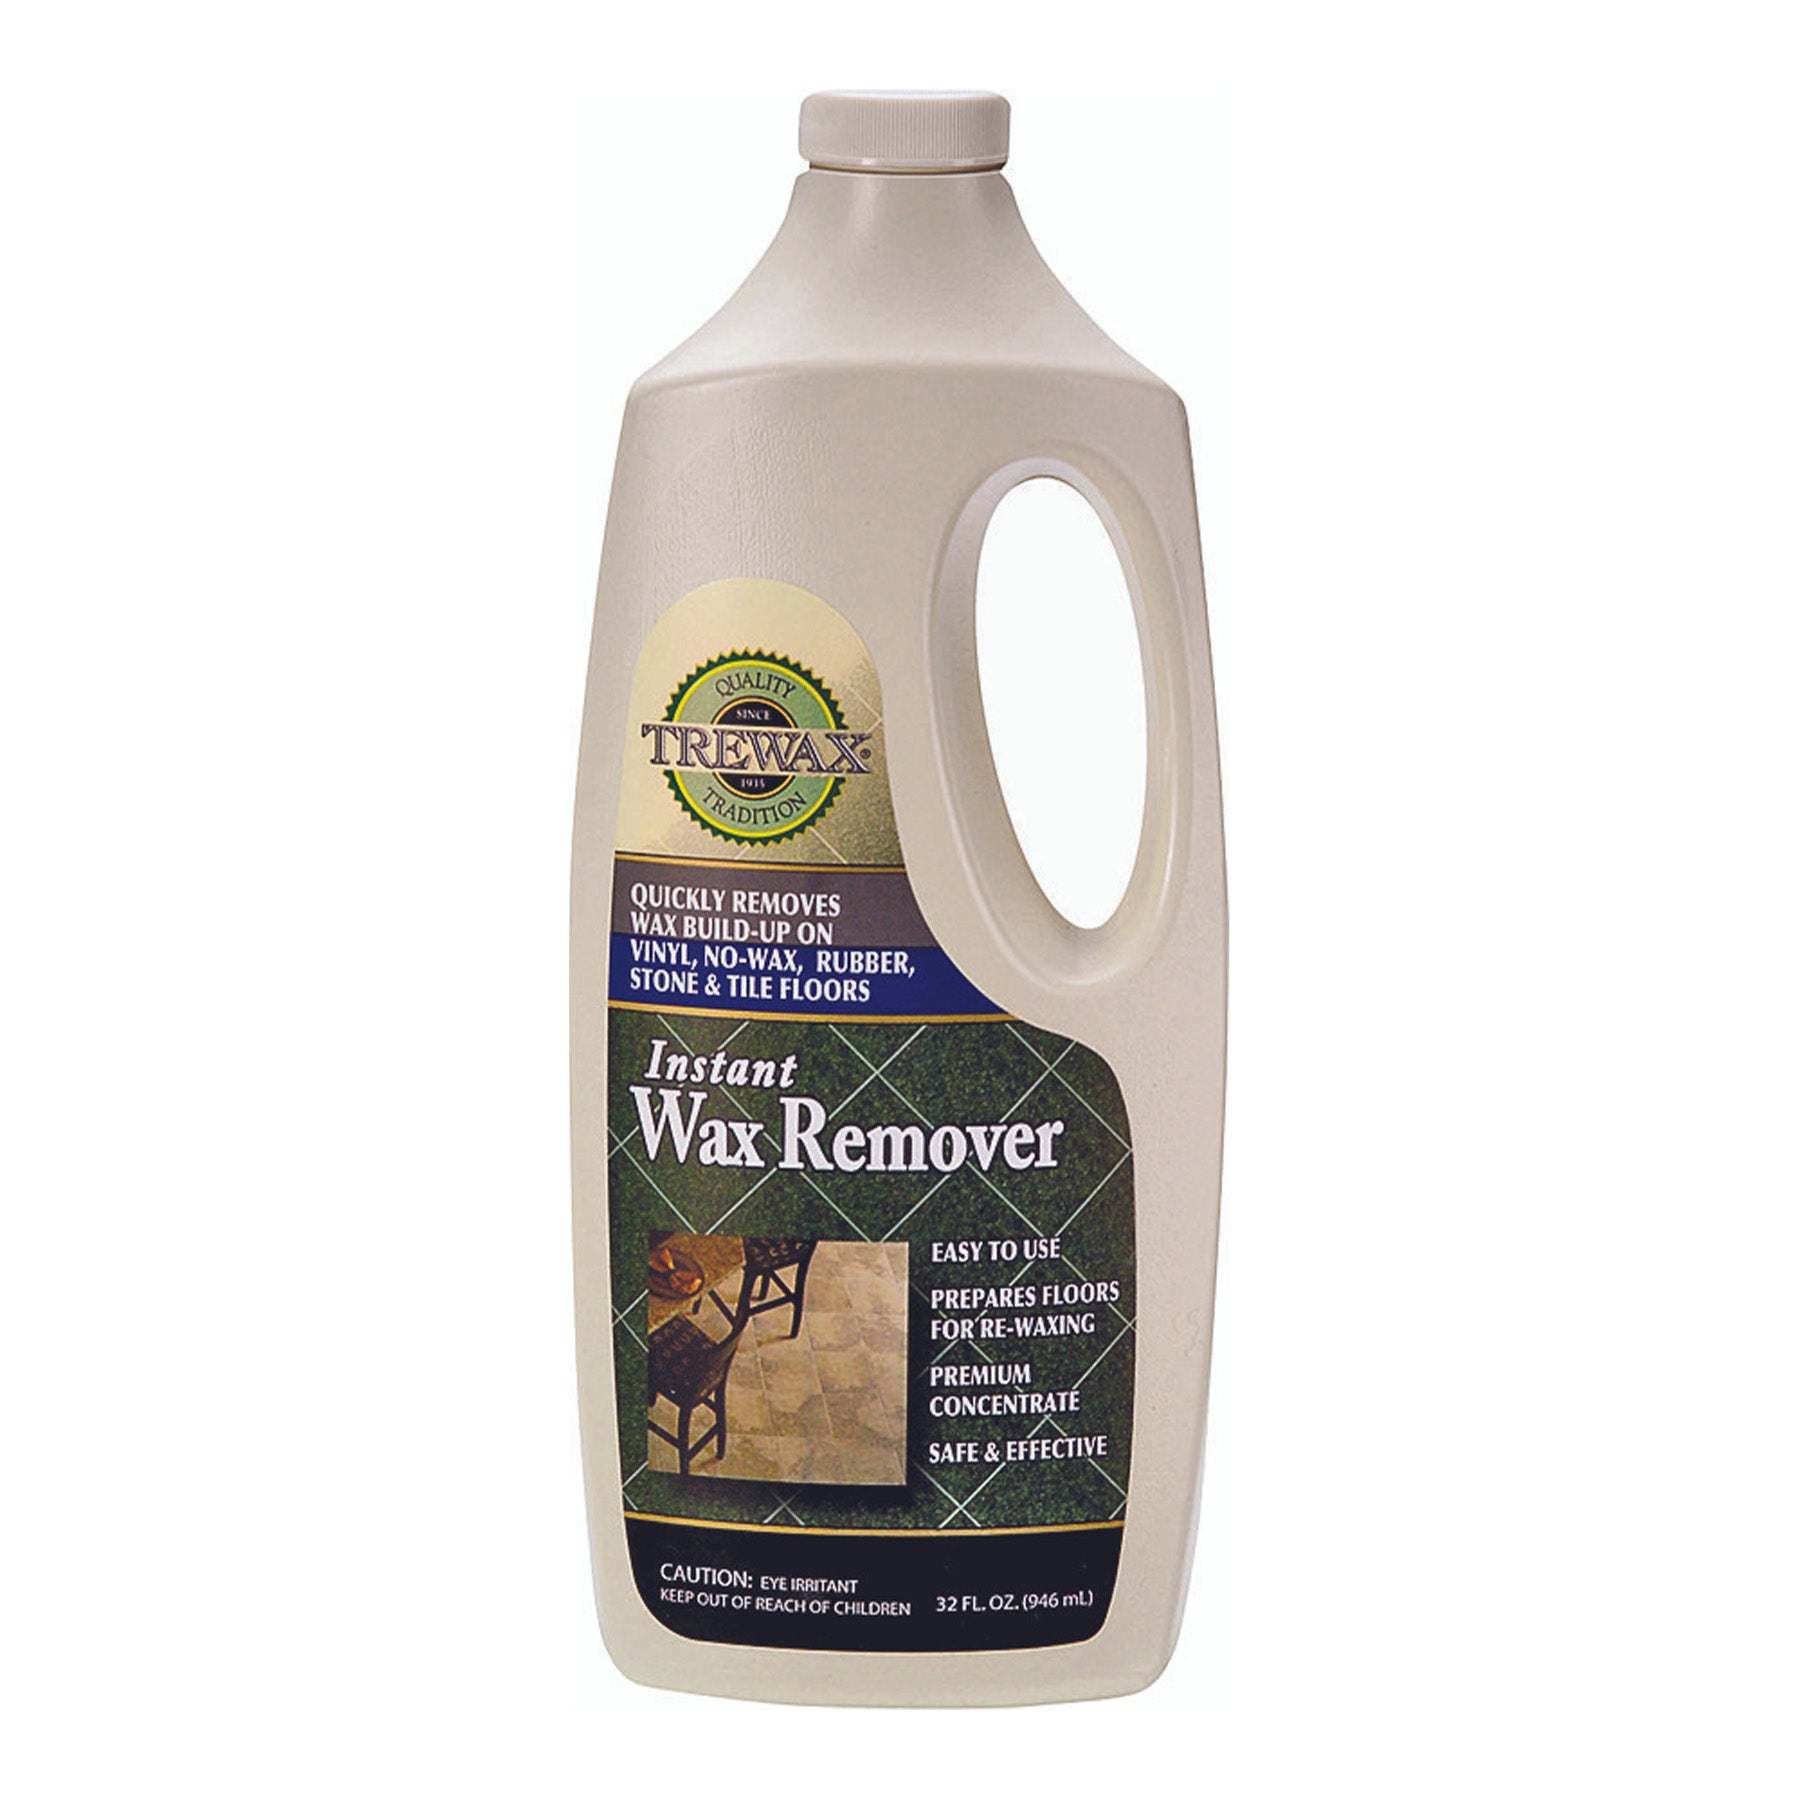 Instant wax remover